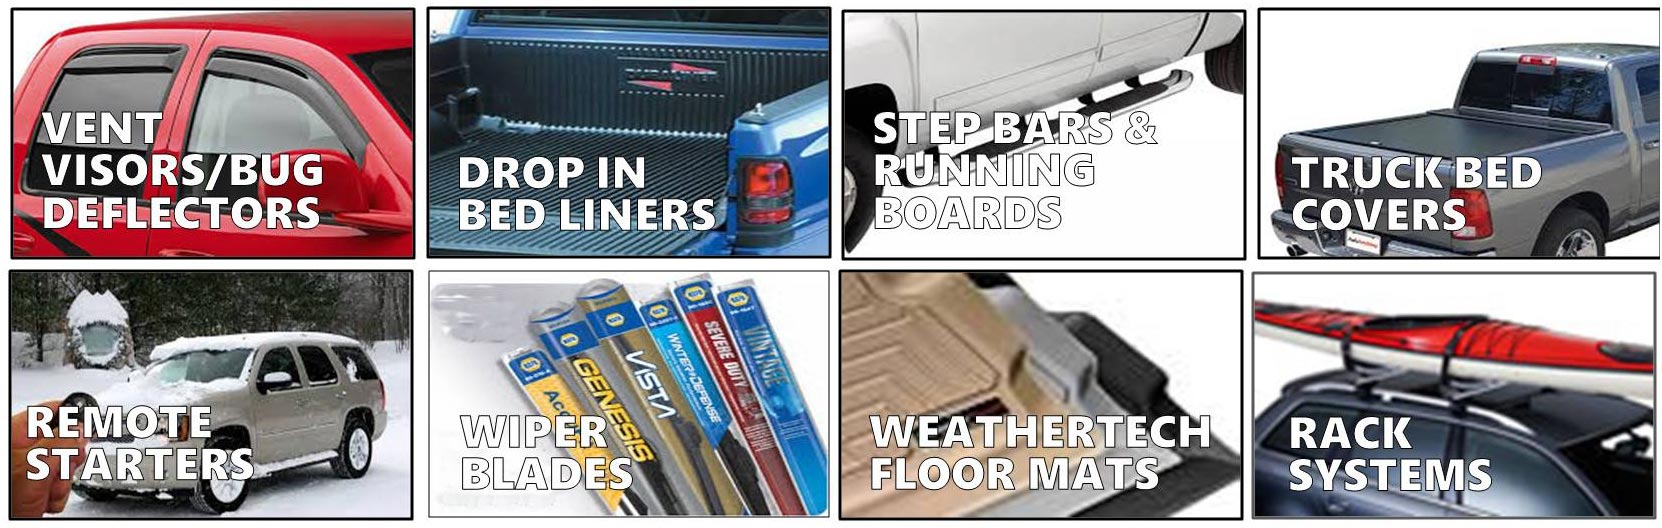 Examples of auto and truck accessories Greenhill Car Wash offers - vent visors/bug deflectors, drop in bed liners, step bars, running boards, bed covers, remote starters, wiper blades, floor mats, rack systems